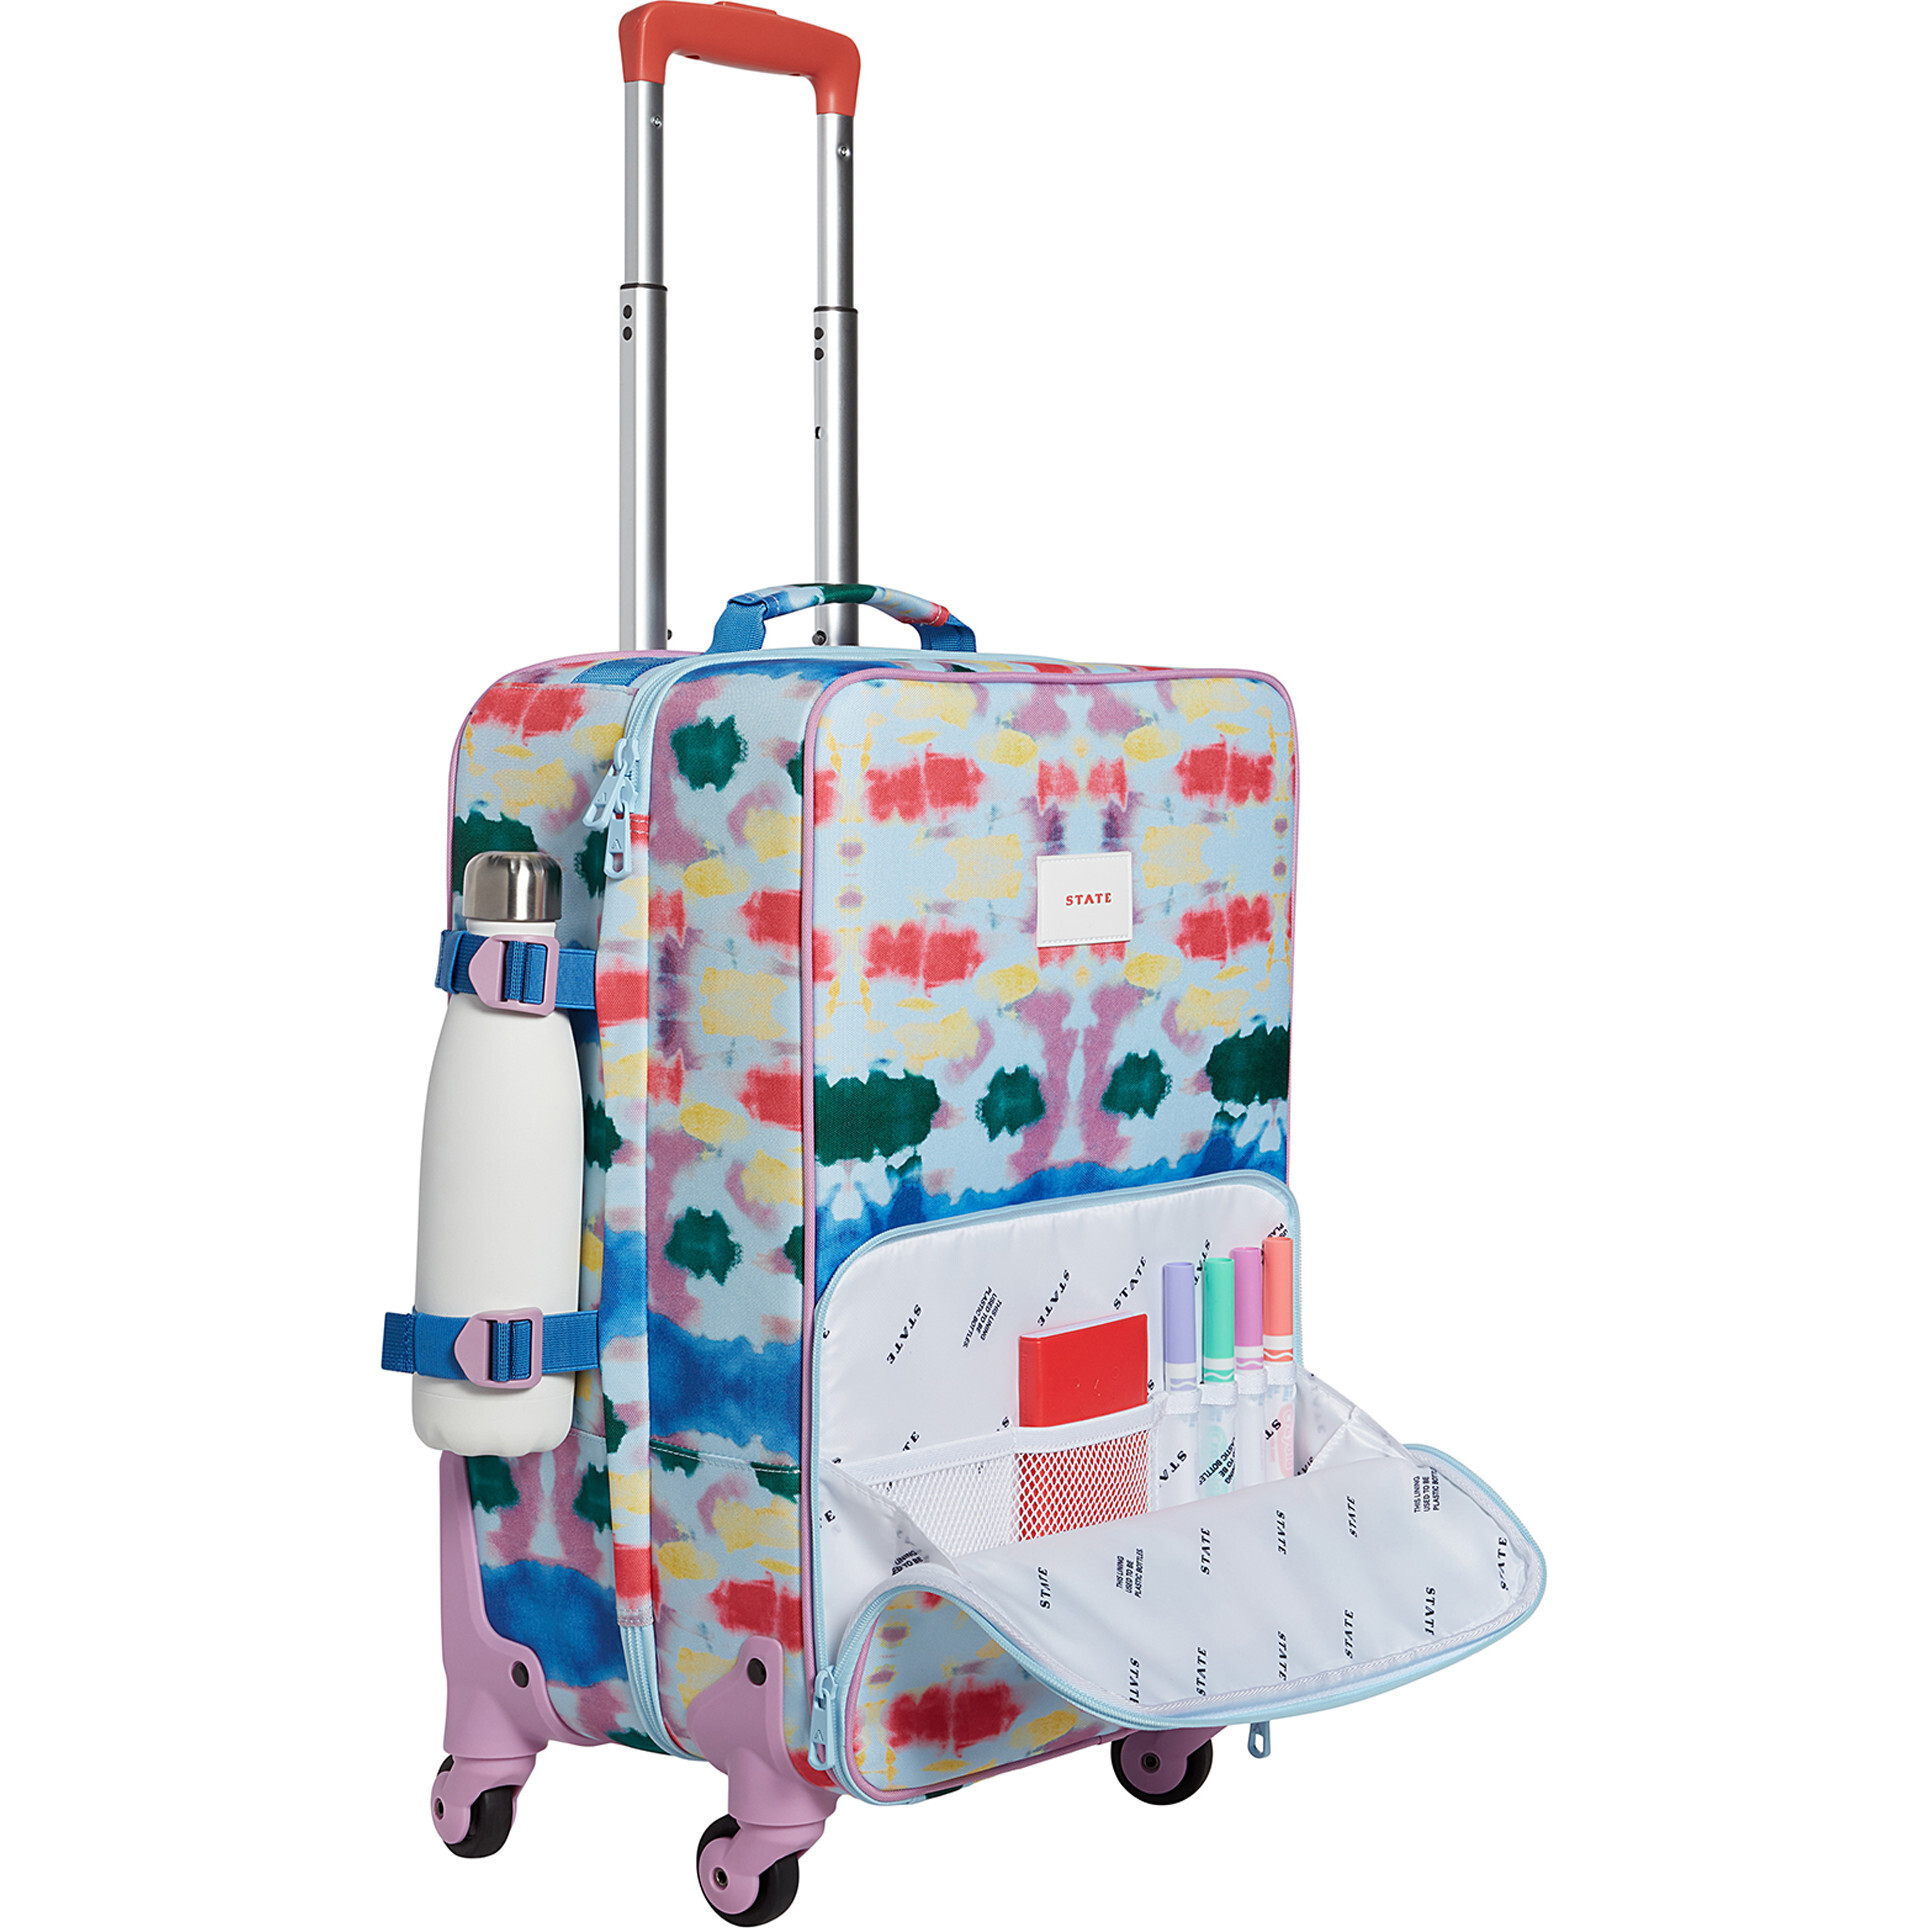 States Bag Logan Suitcase in Tie Dye for best luggage for kids